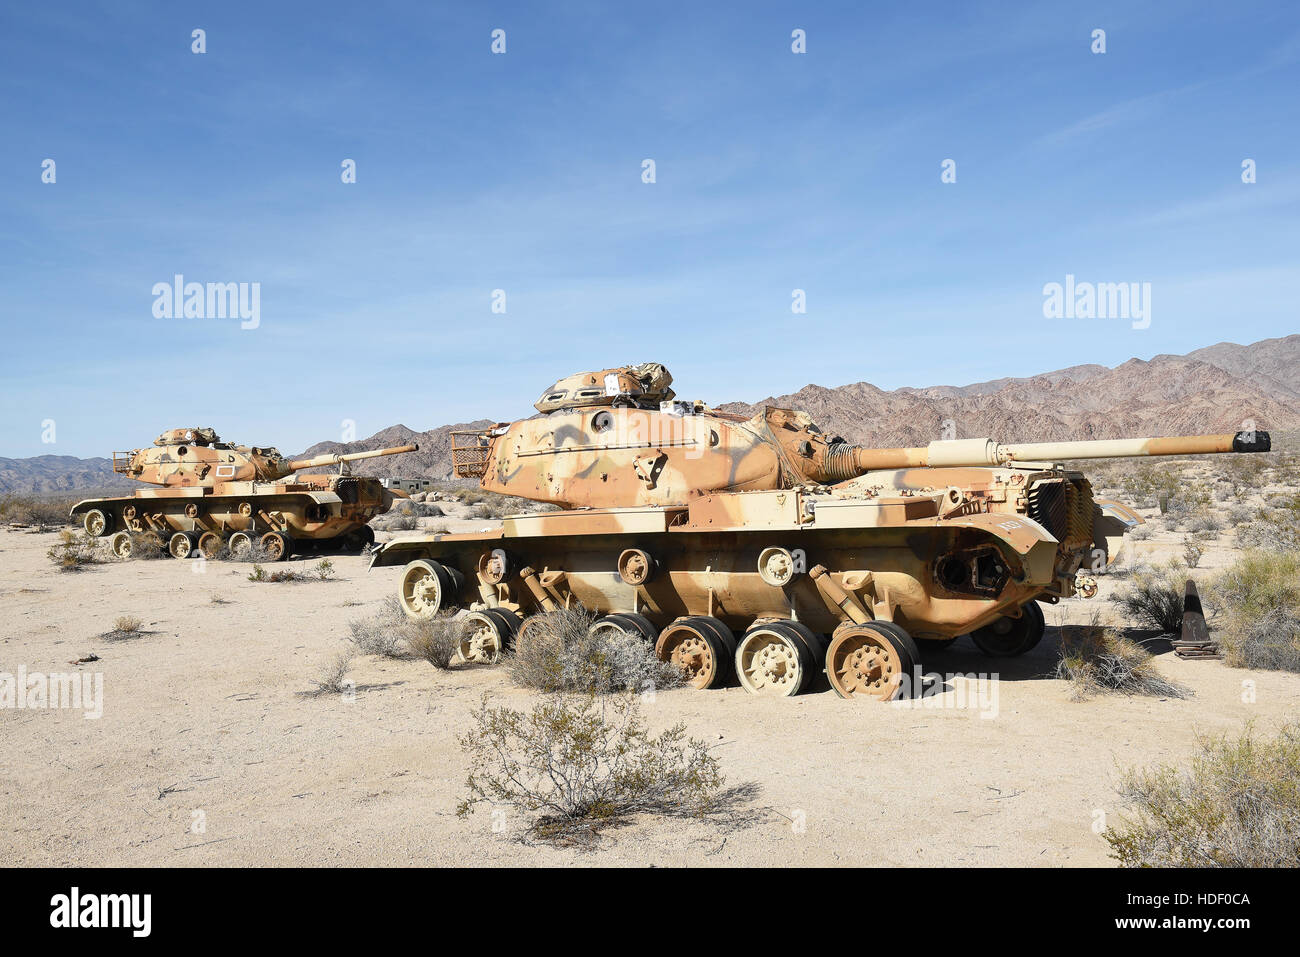 CHIRIACO SUMMIT, CA - DECEMBER 10, 2016: Two M60 Tanks. The derelict vehicles are at the General Patton Memorial Museum in the California desert. Stock Photo